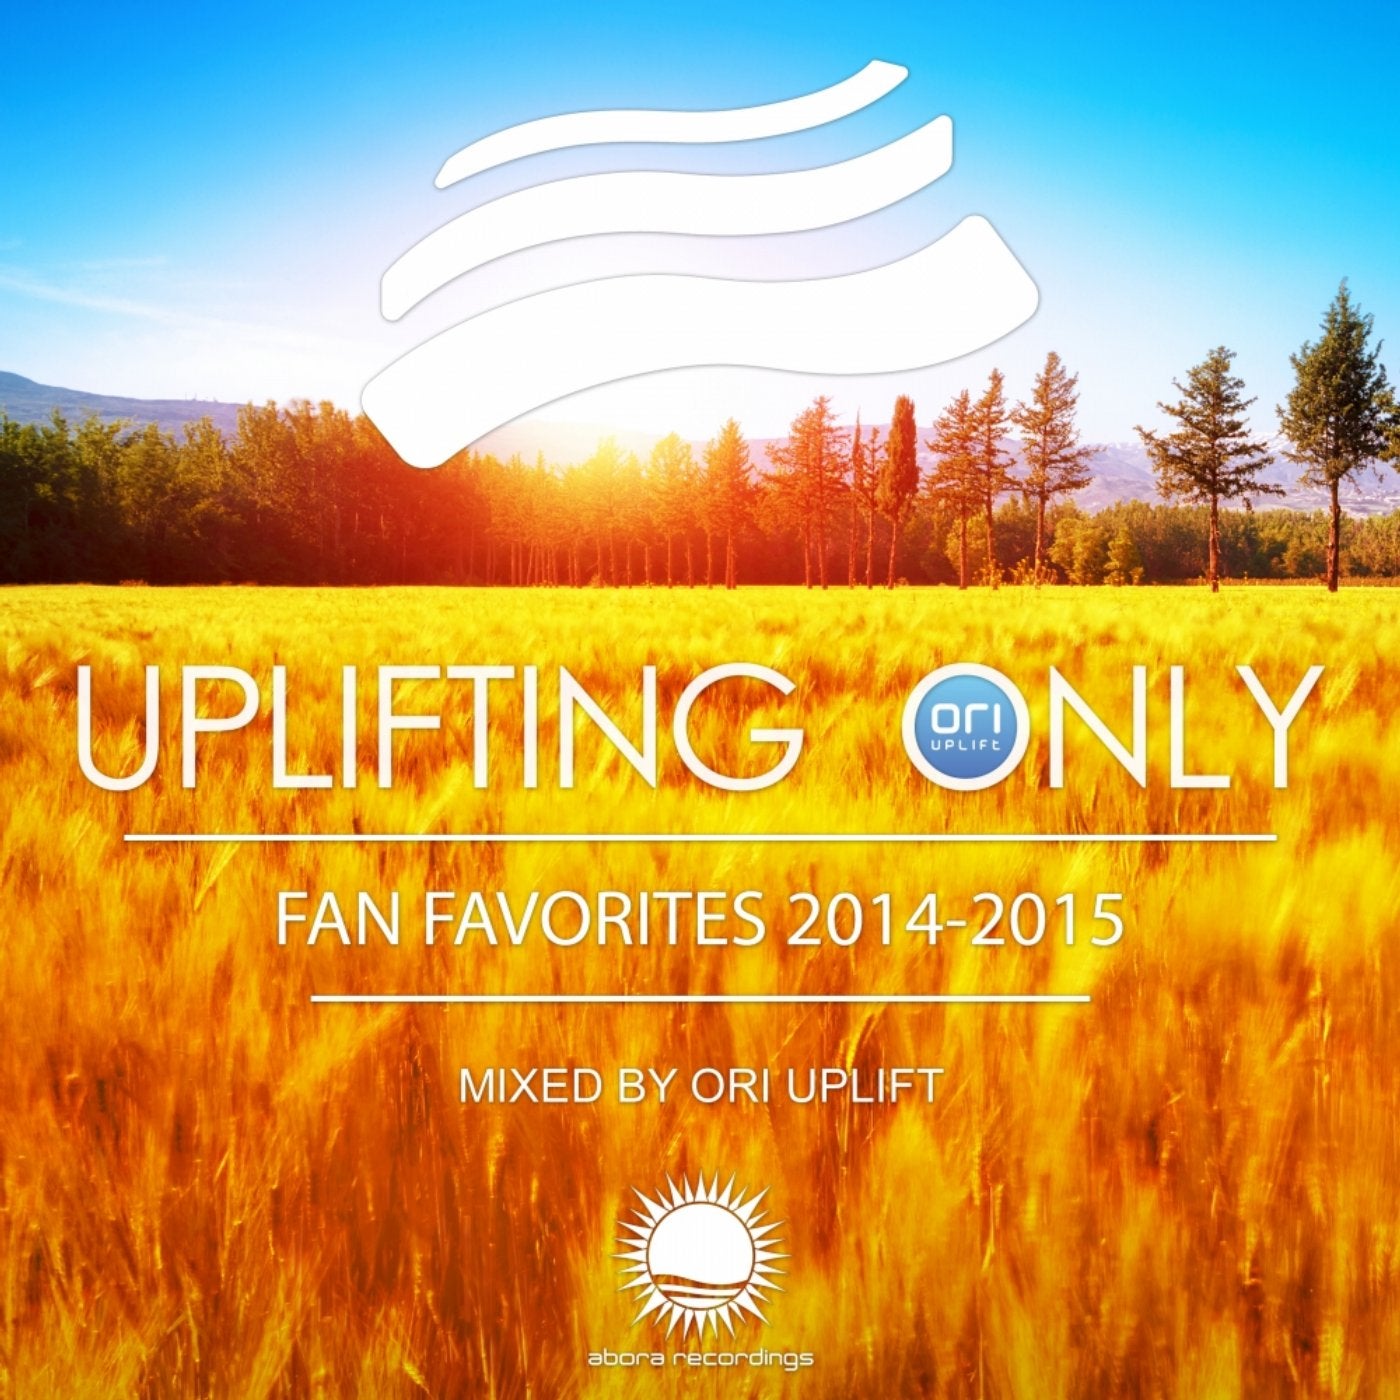 Life is cold. Uplifting only. Uplifting only Fan Favorit. Ori uplift - Uplifting only 049 (2014-01-15). Michael Flint Trance.